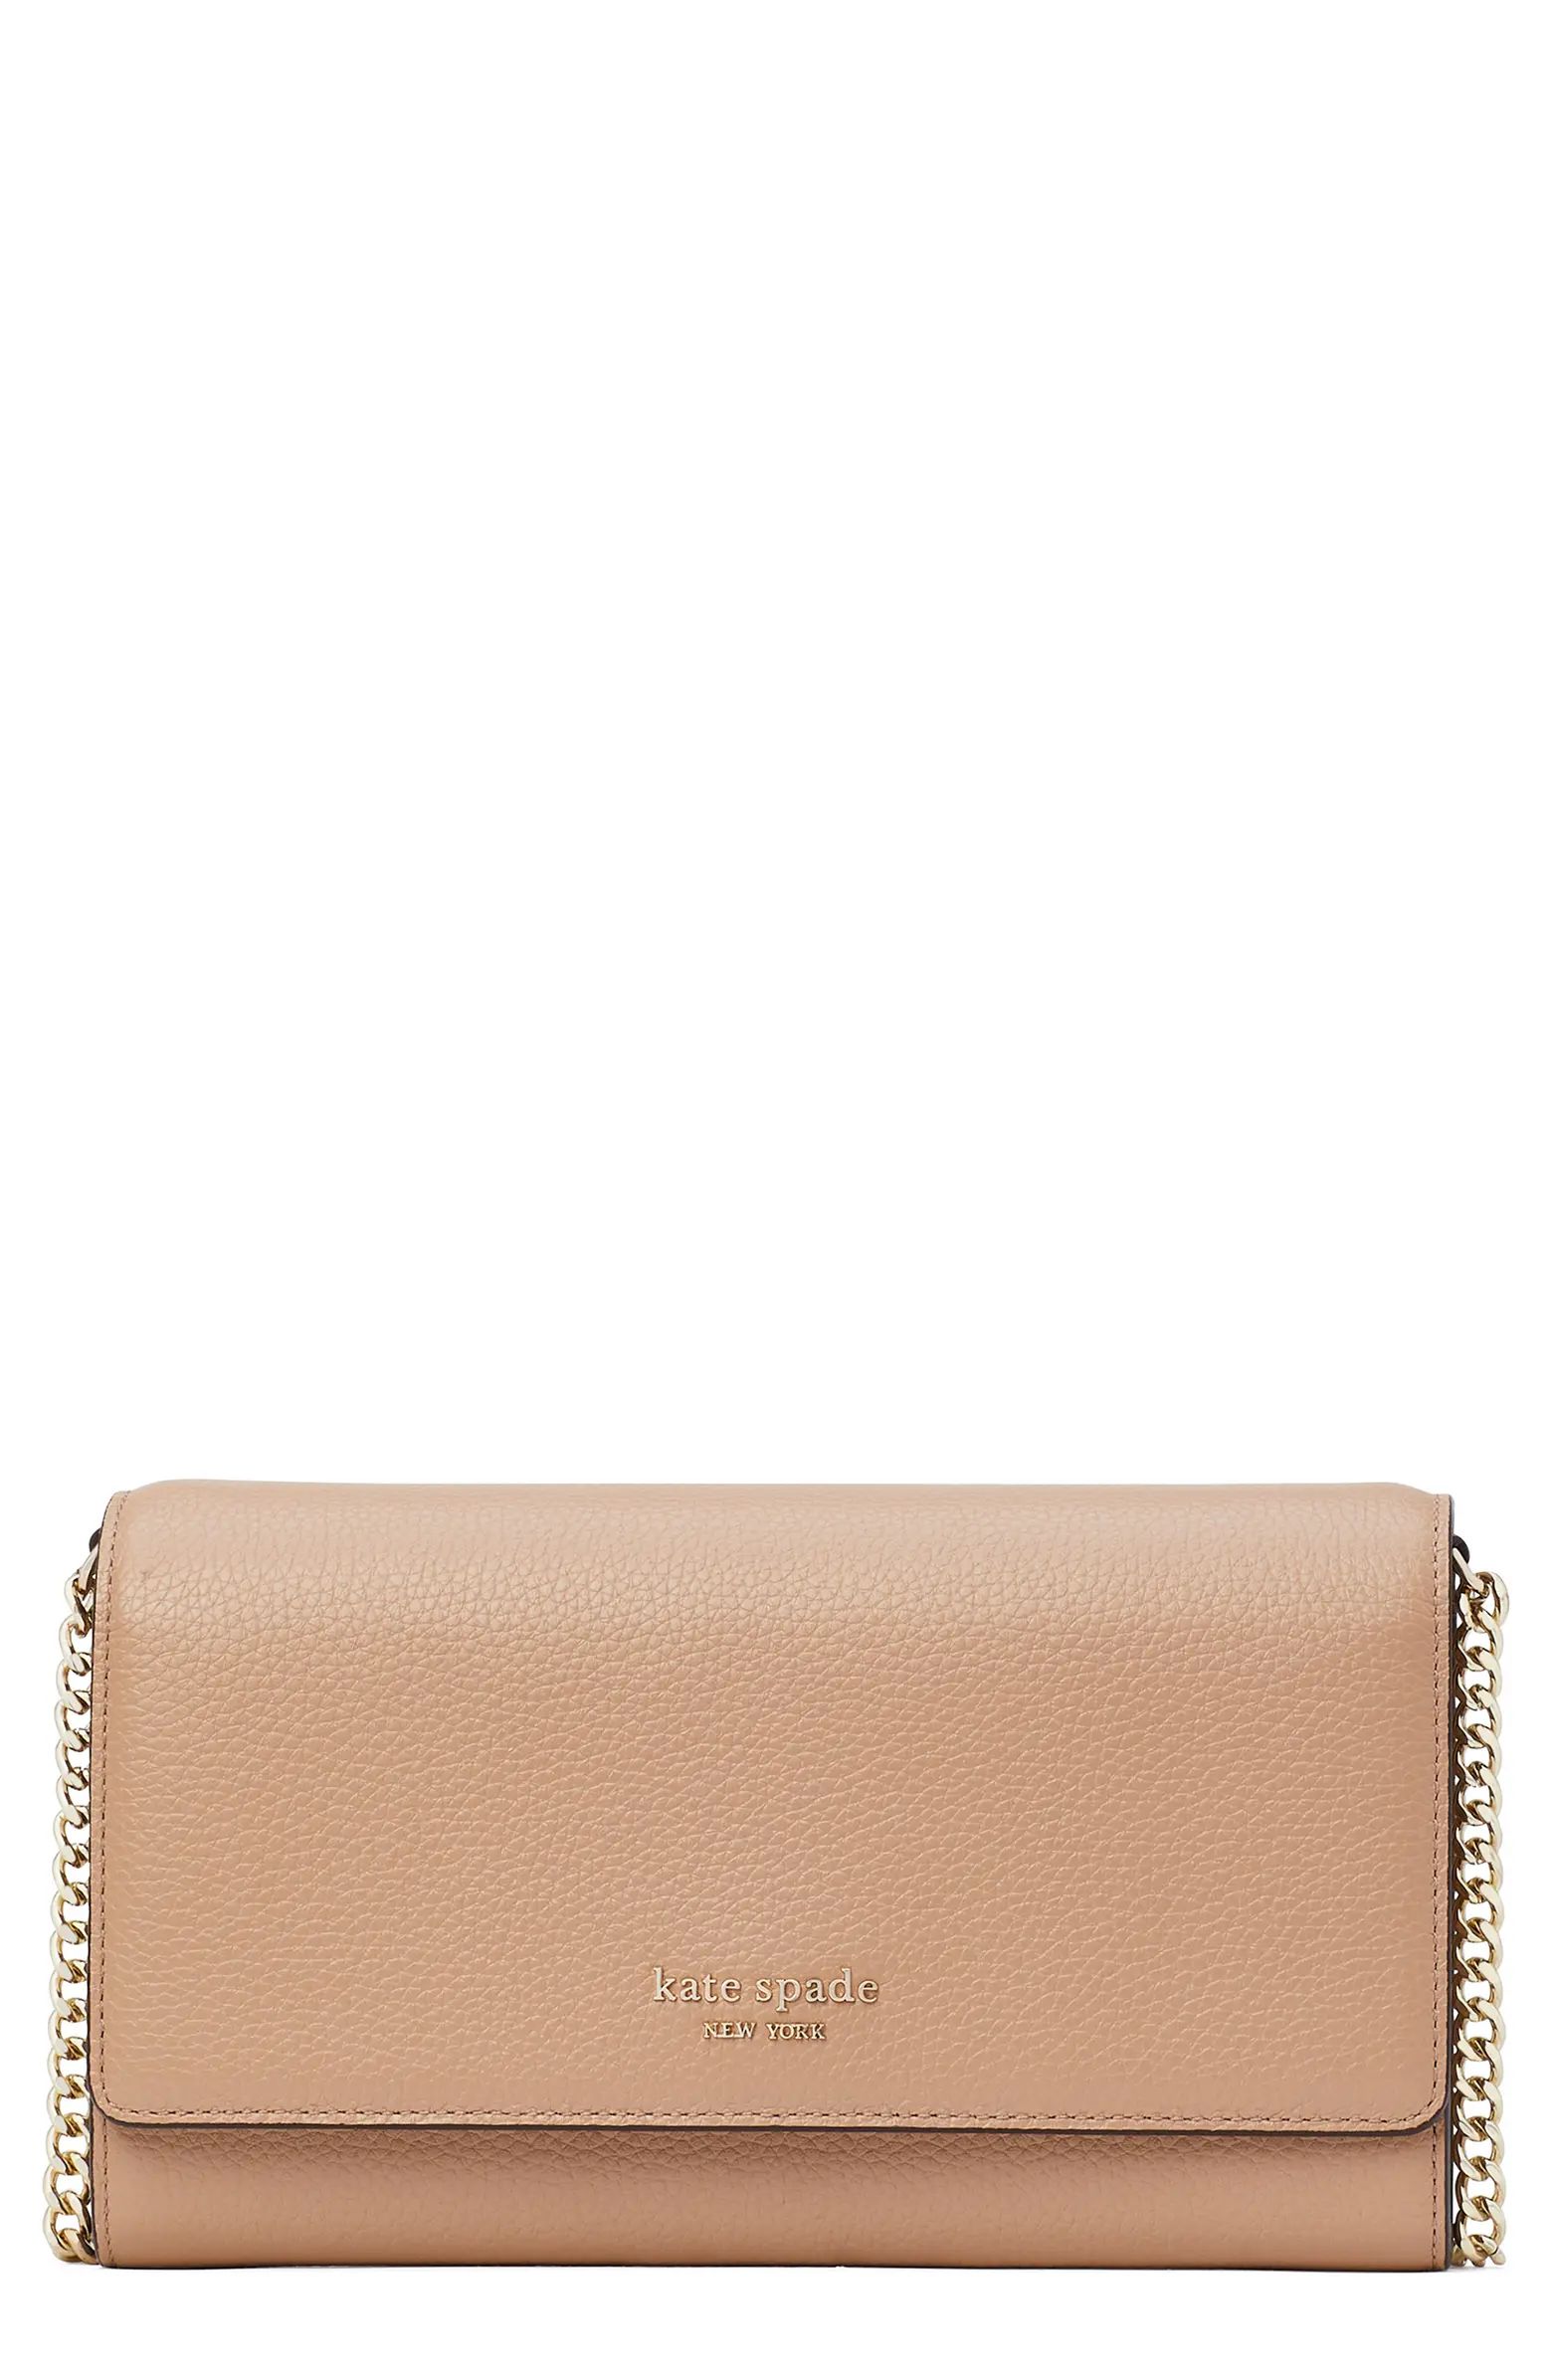 kate spade new york Roulette Leather Wallet on a Chain | Nordstrom | Nordstrom